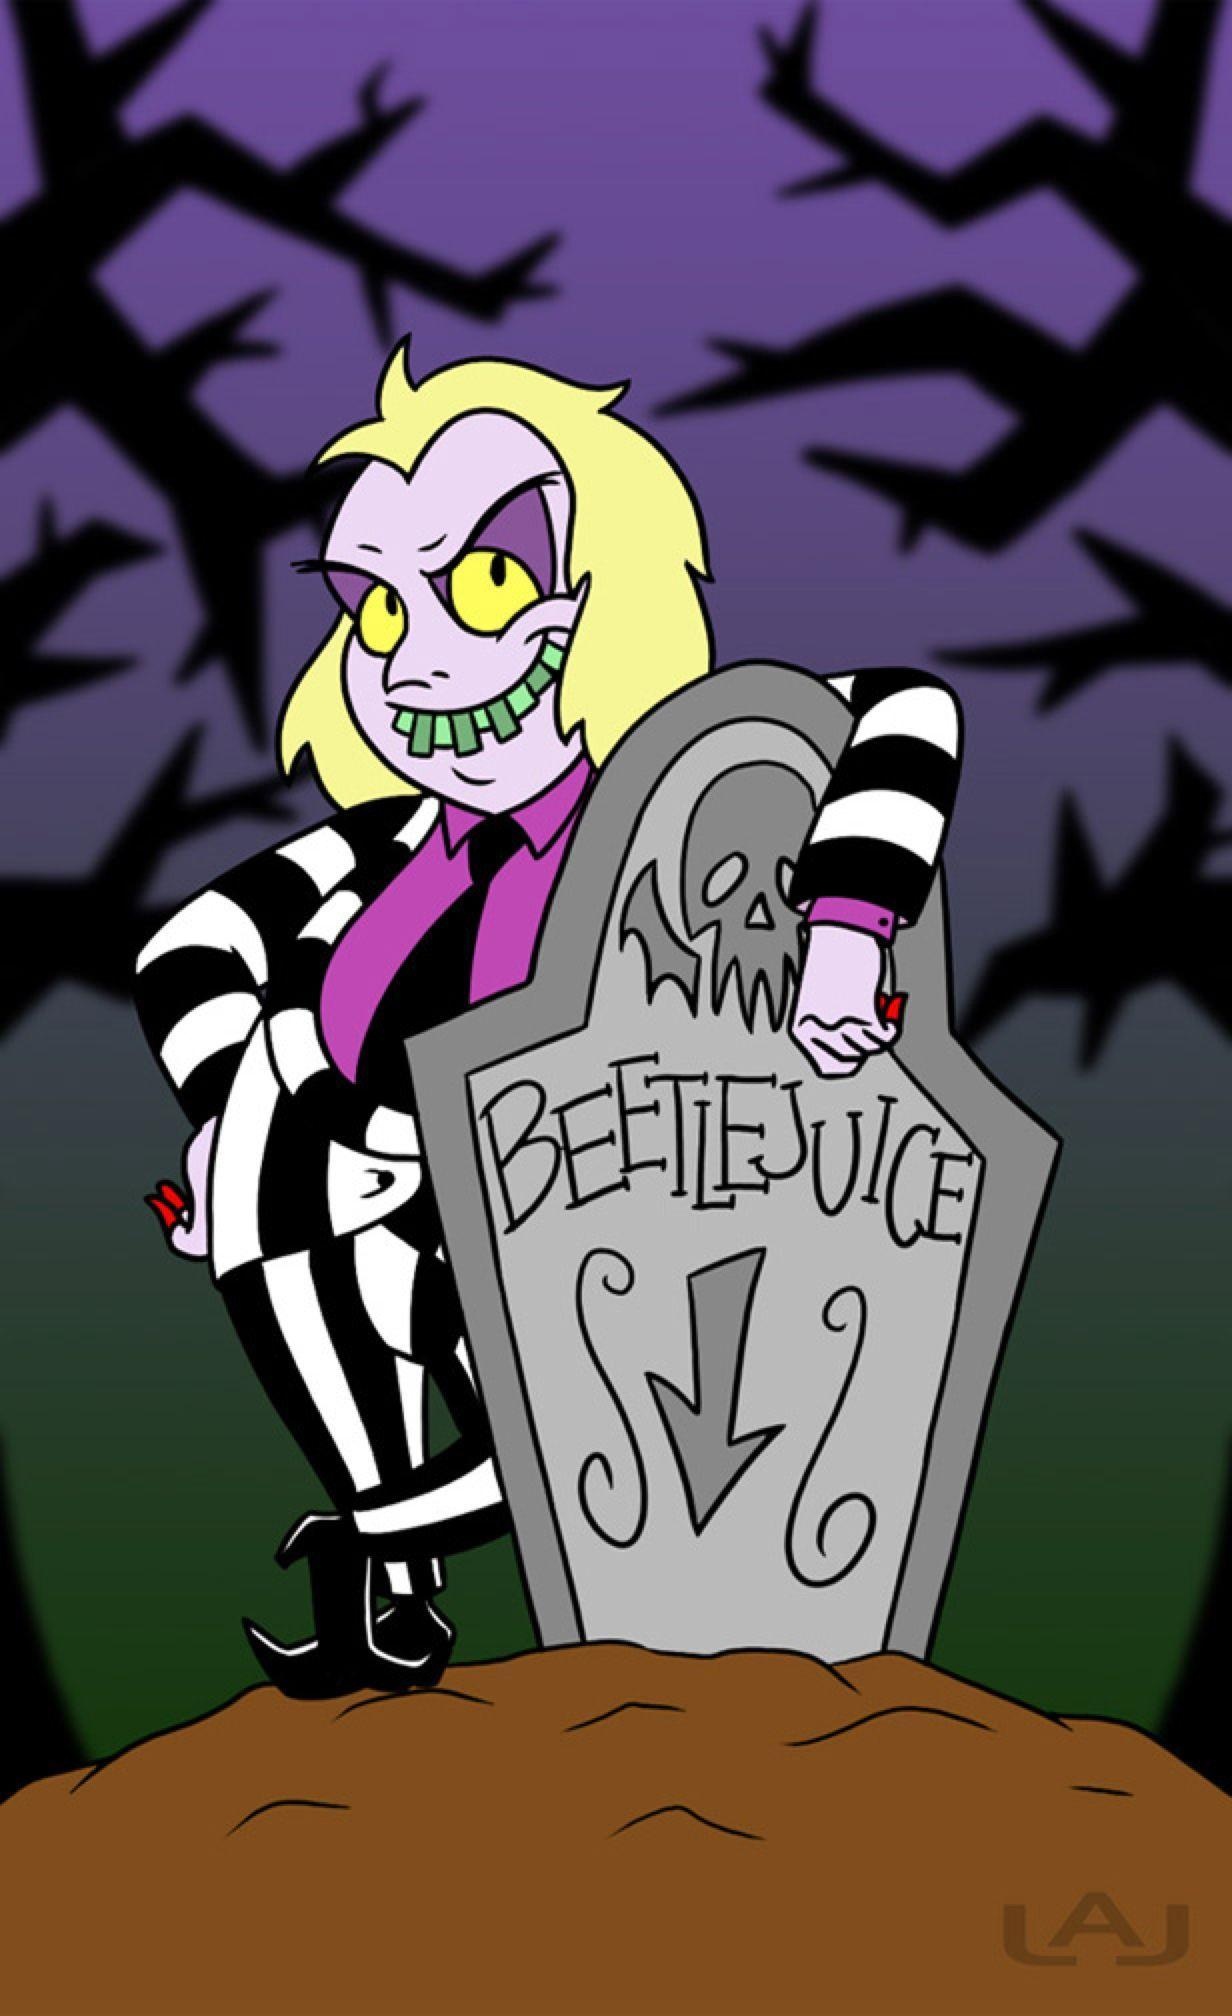 Beetlejuice (Cartoon): A ghost and the main and title character of the show, Voiced by Stephen Ouimette. 1240x2020 HD Wallpaper.